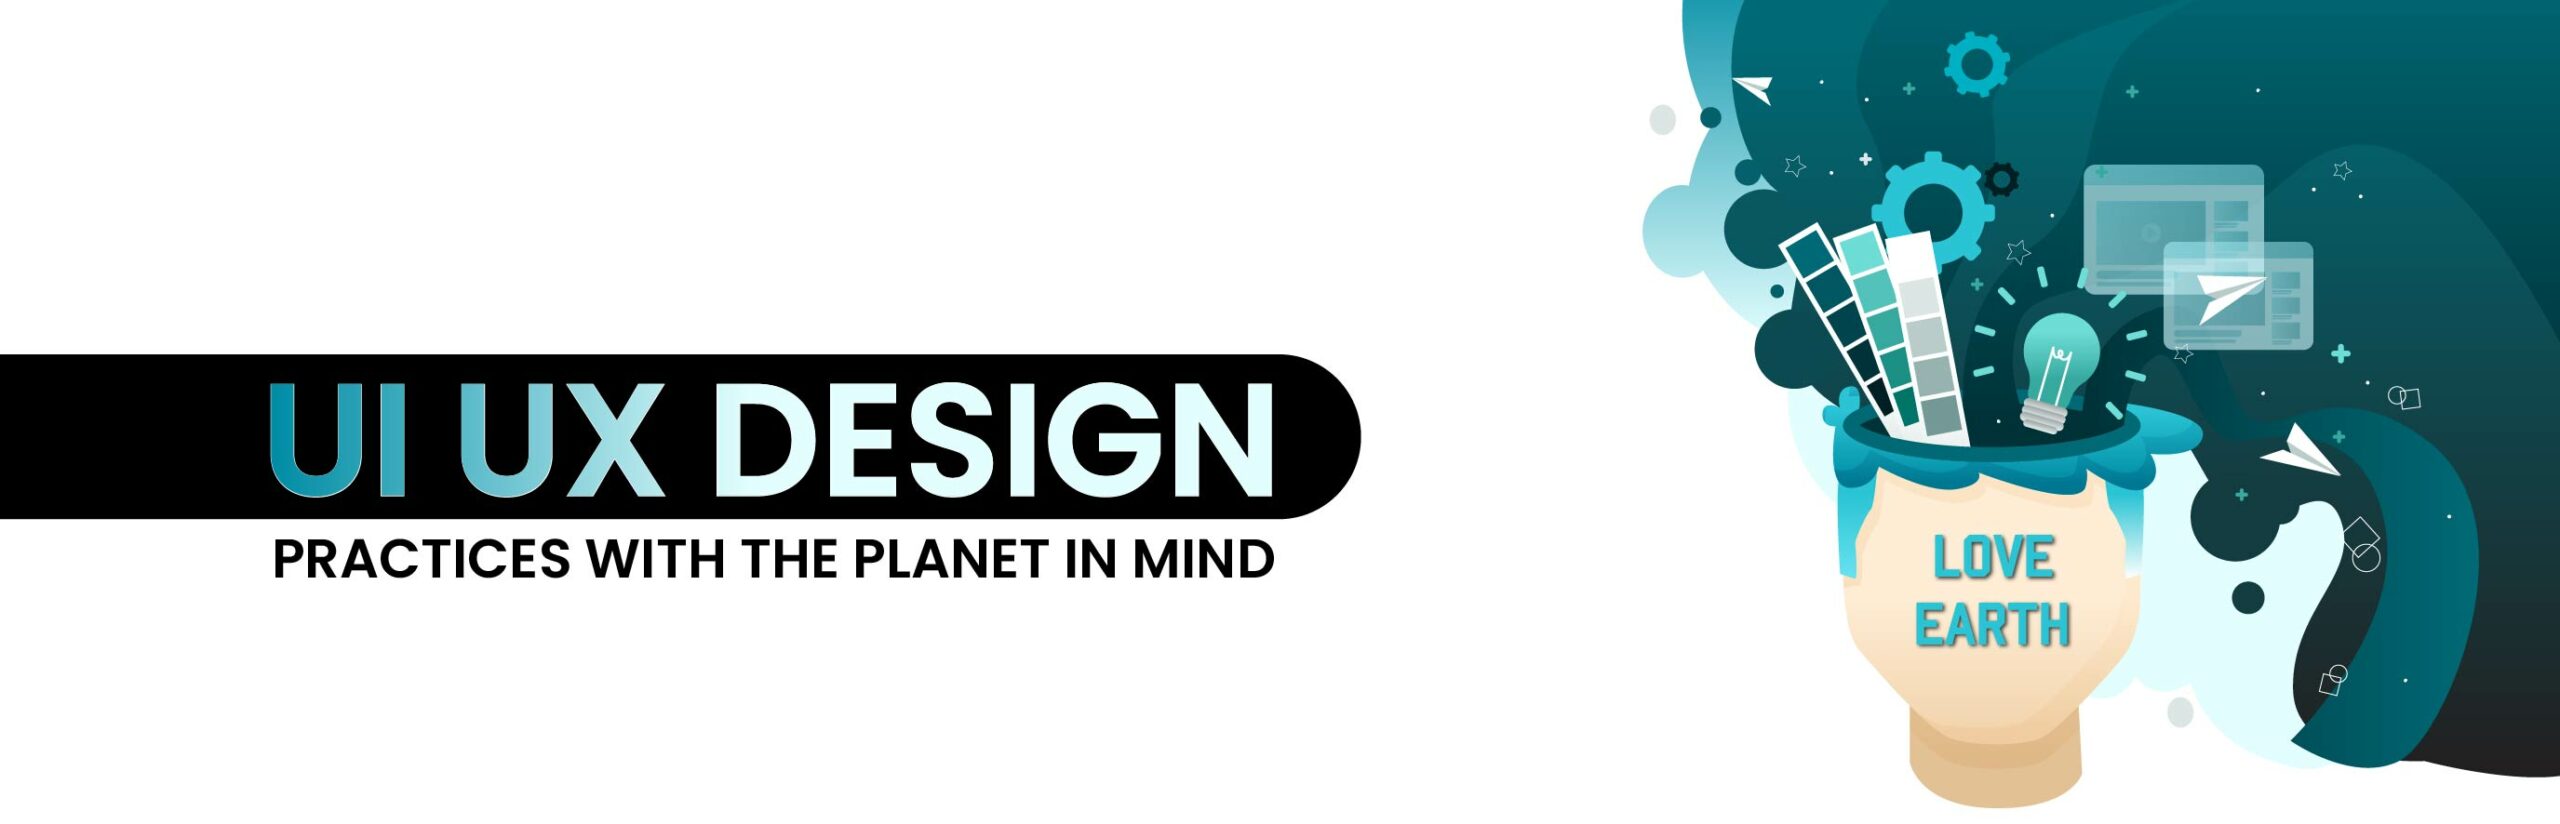 Sustainable UI UX Design Practices with the Planet in Mind